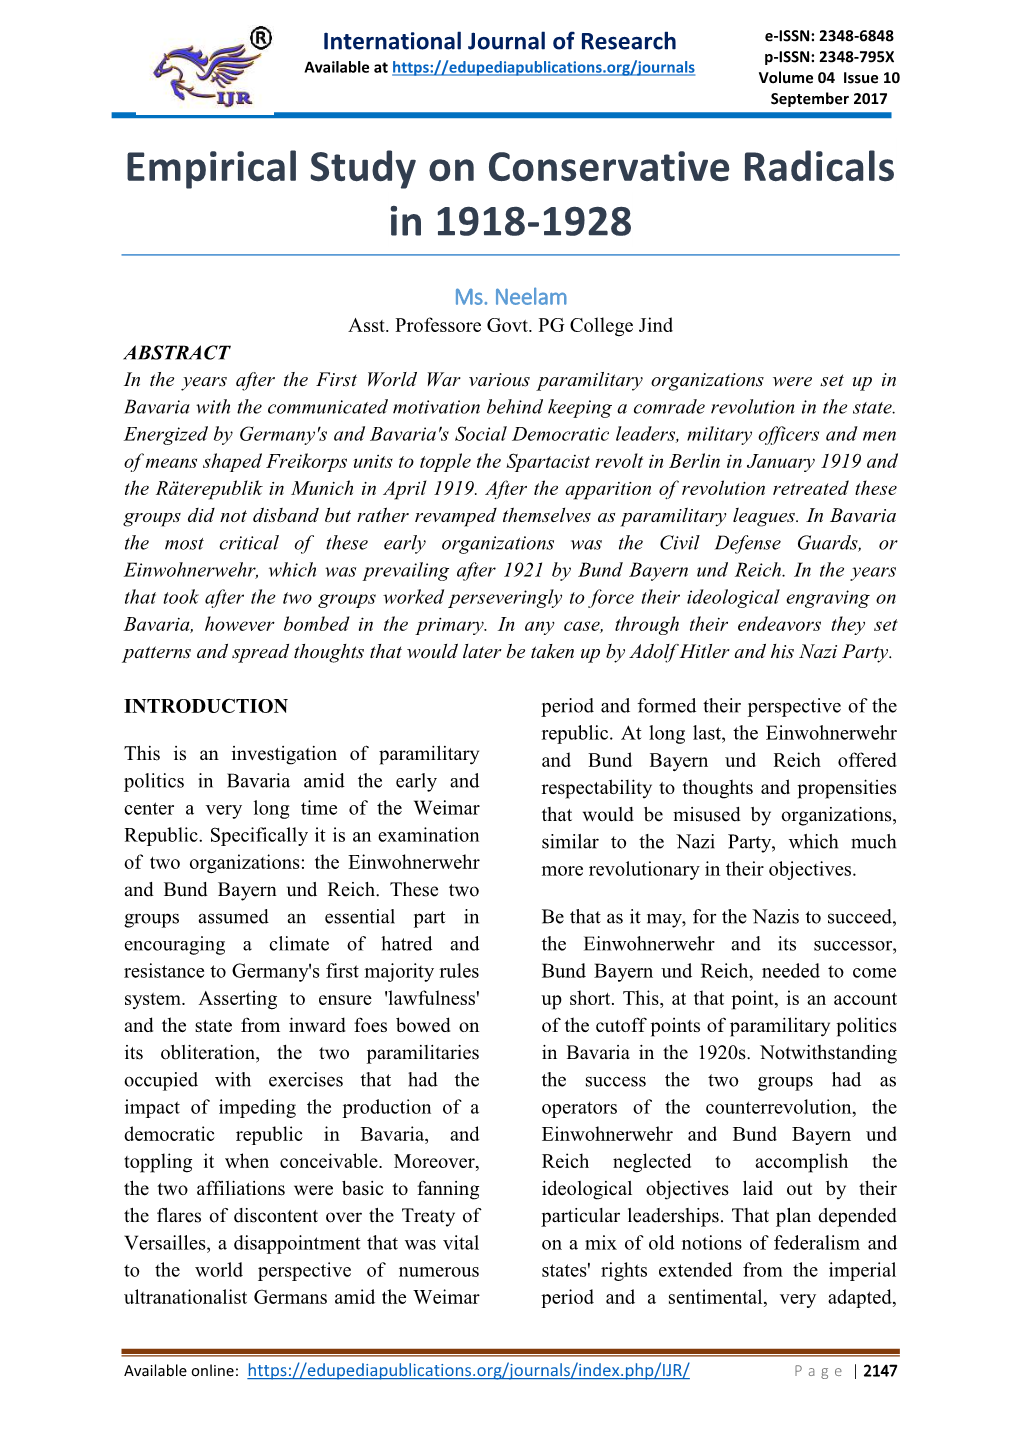 Empirical Study on Conservative Radicals in 1918-1928